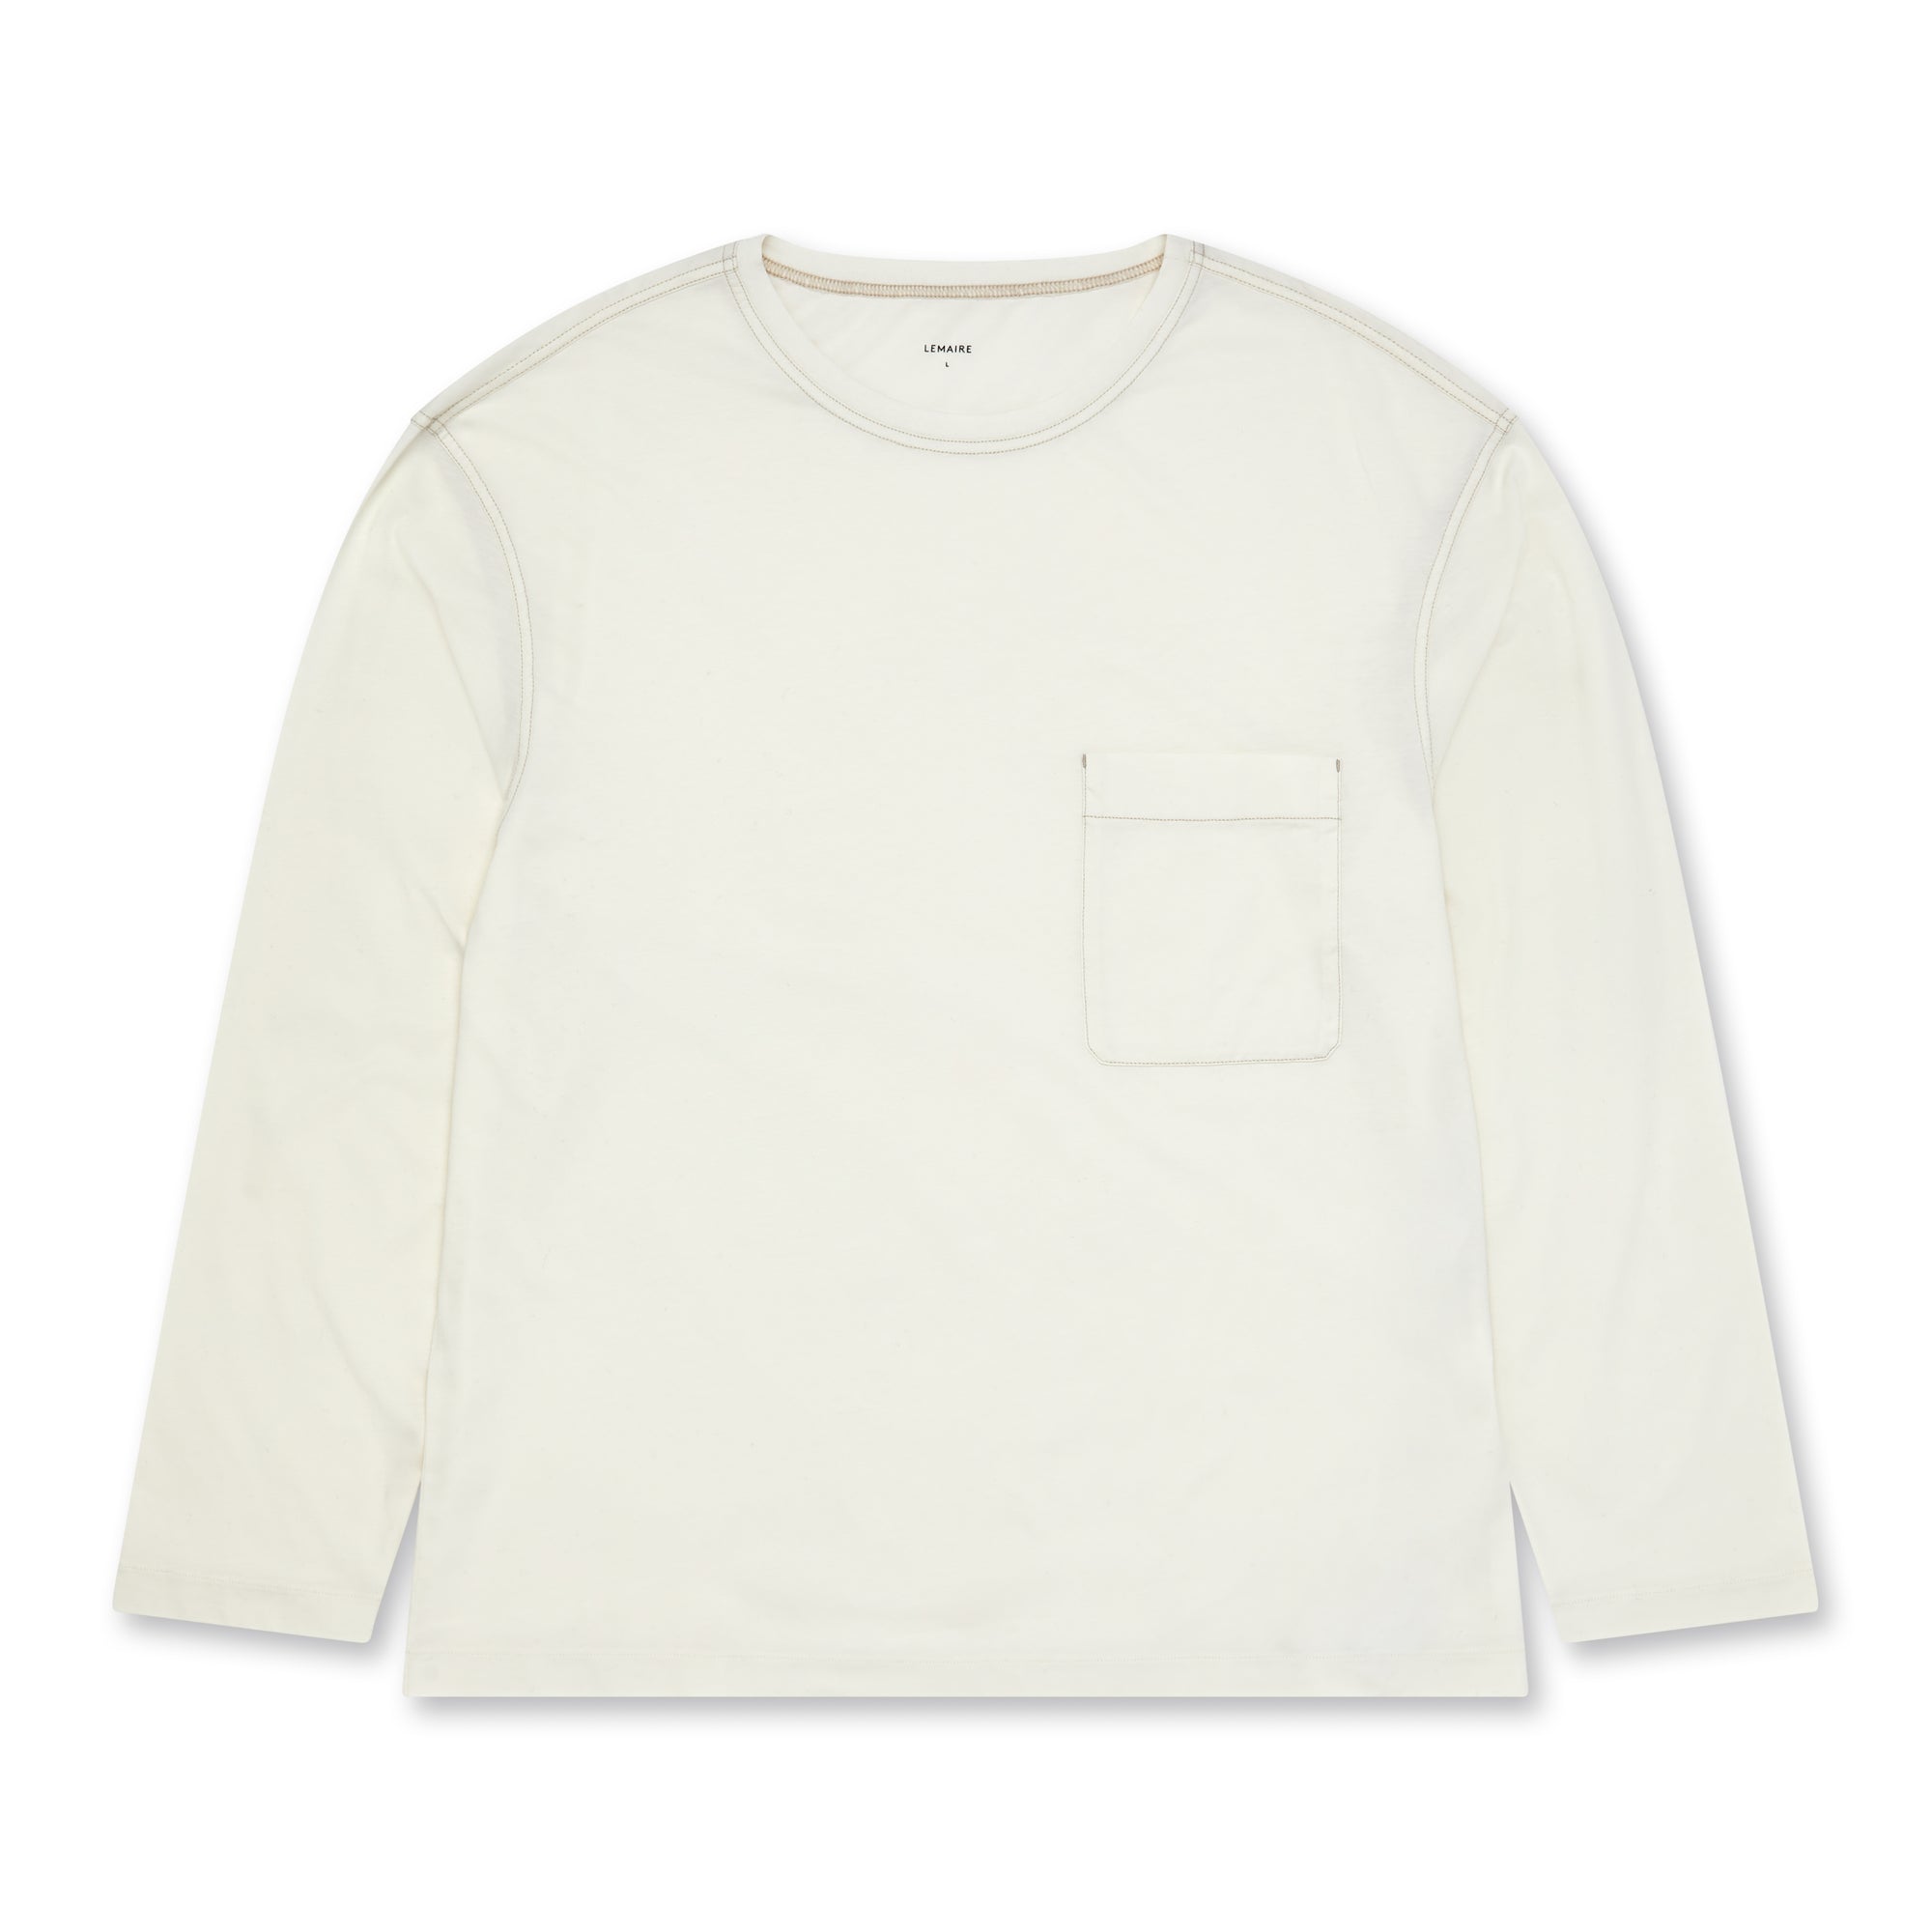 Lemaire - Men’s Long Sleeve Patch Pocket T-Shirt - (White) view 4